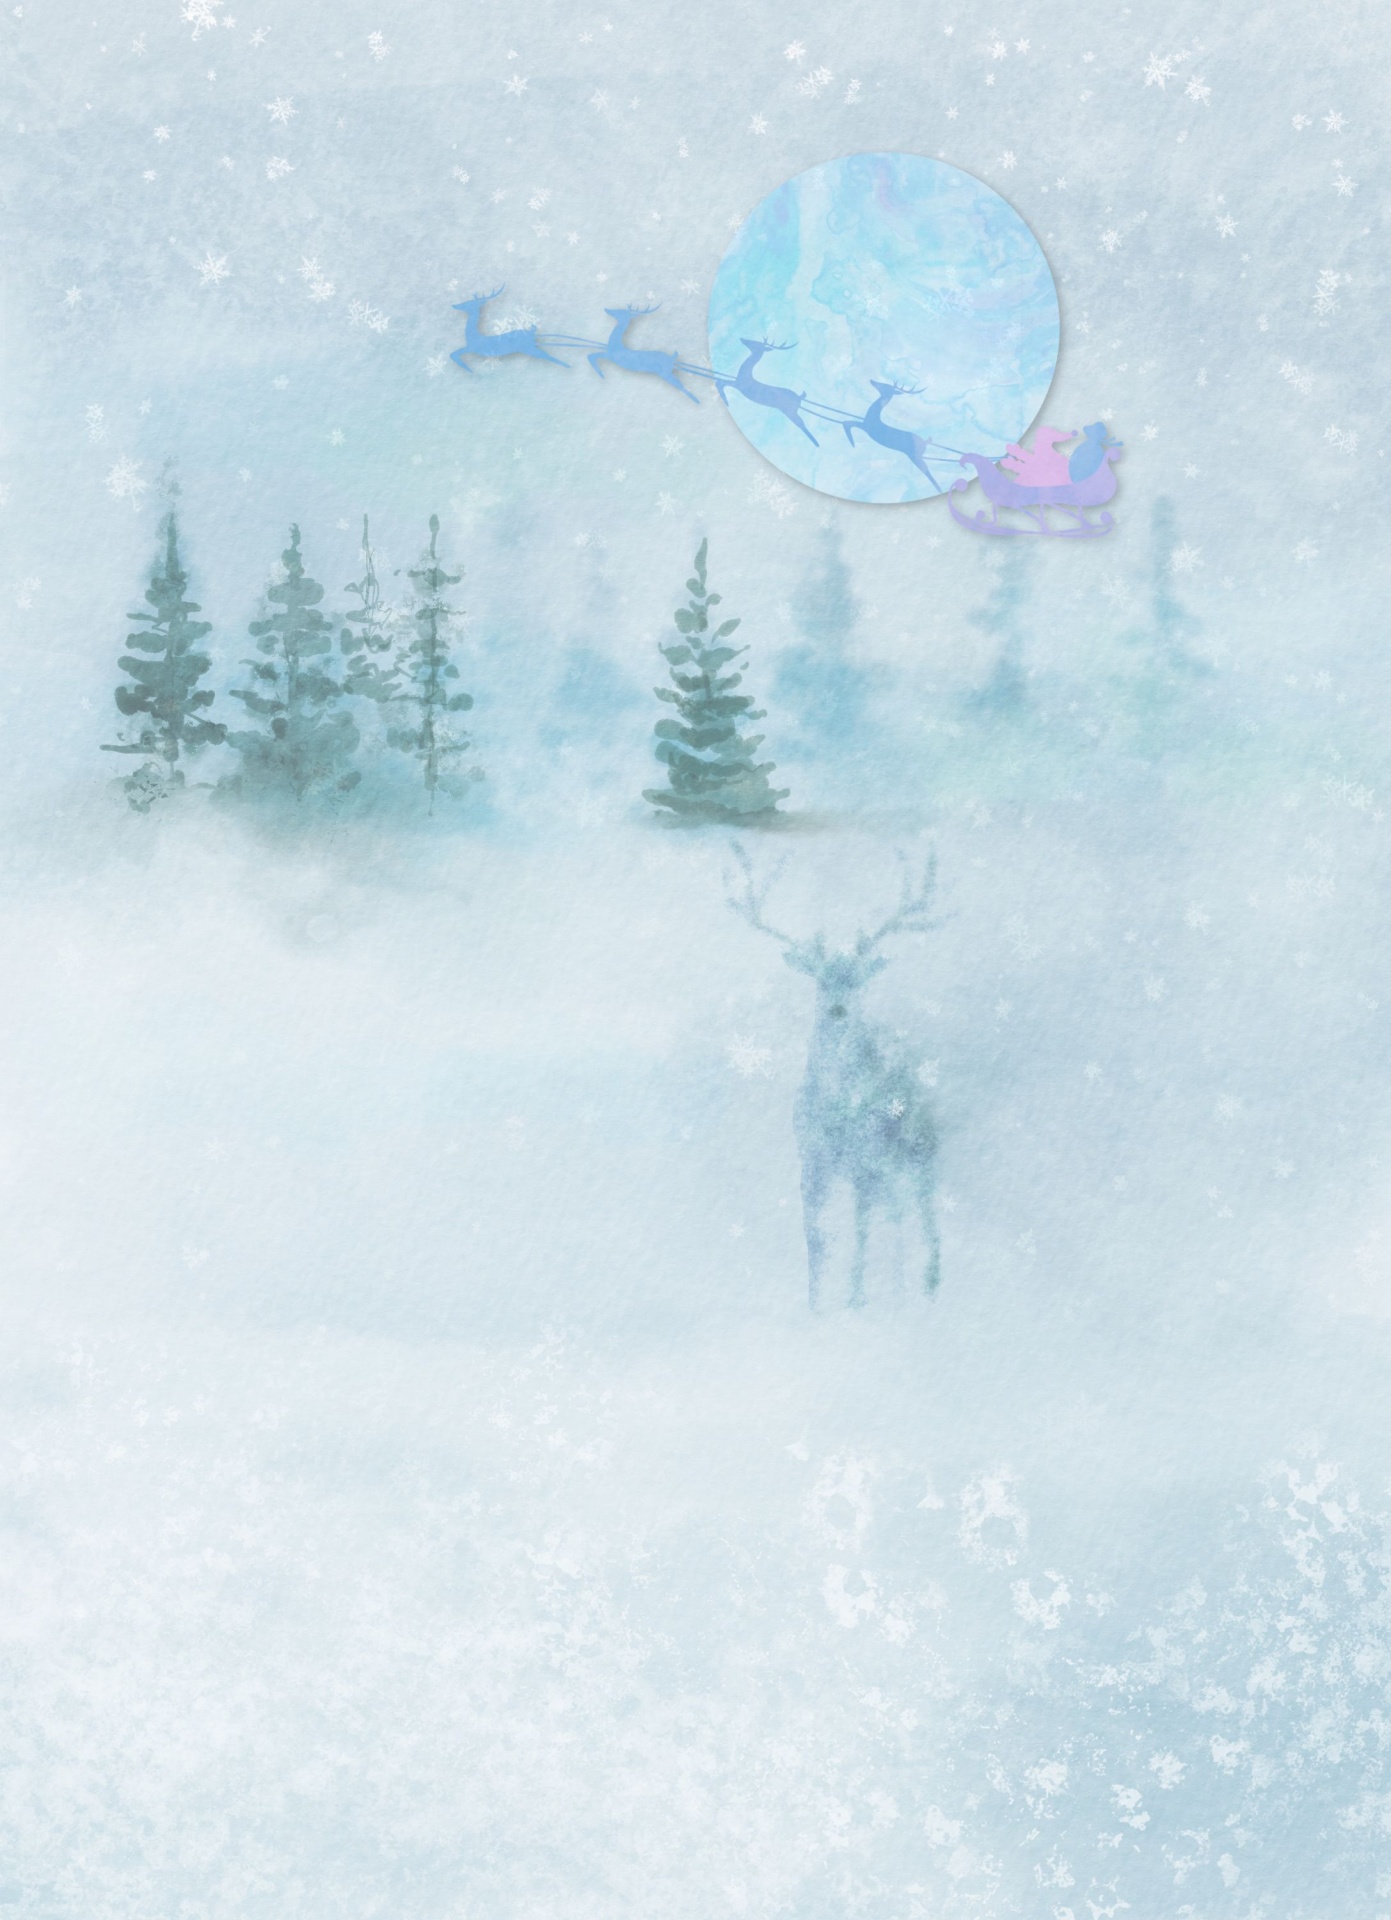 wintry forest with santa and his sleight passing in front of the moon